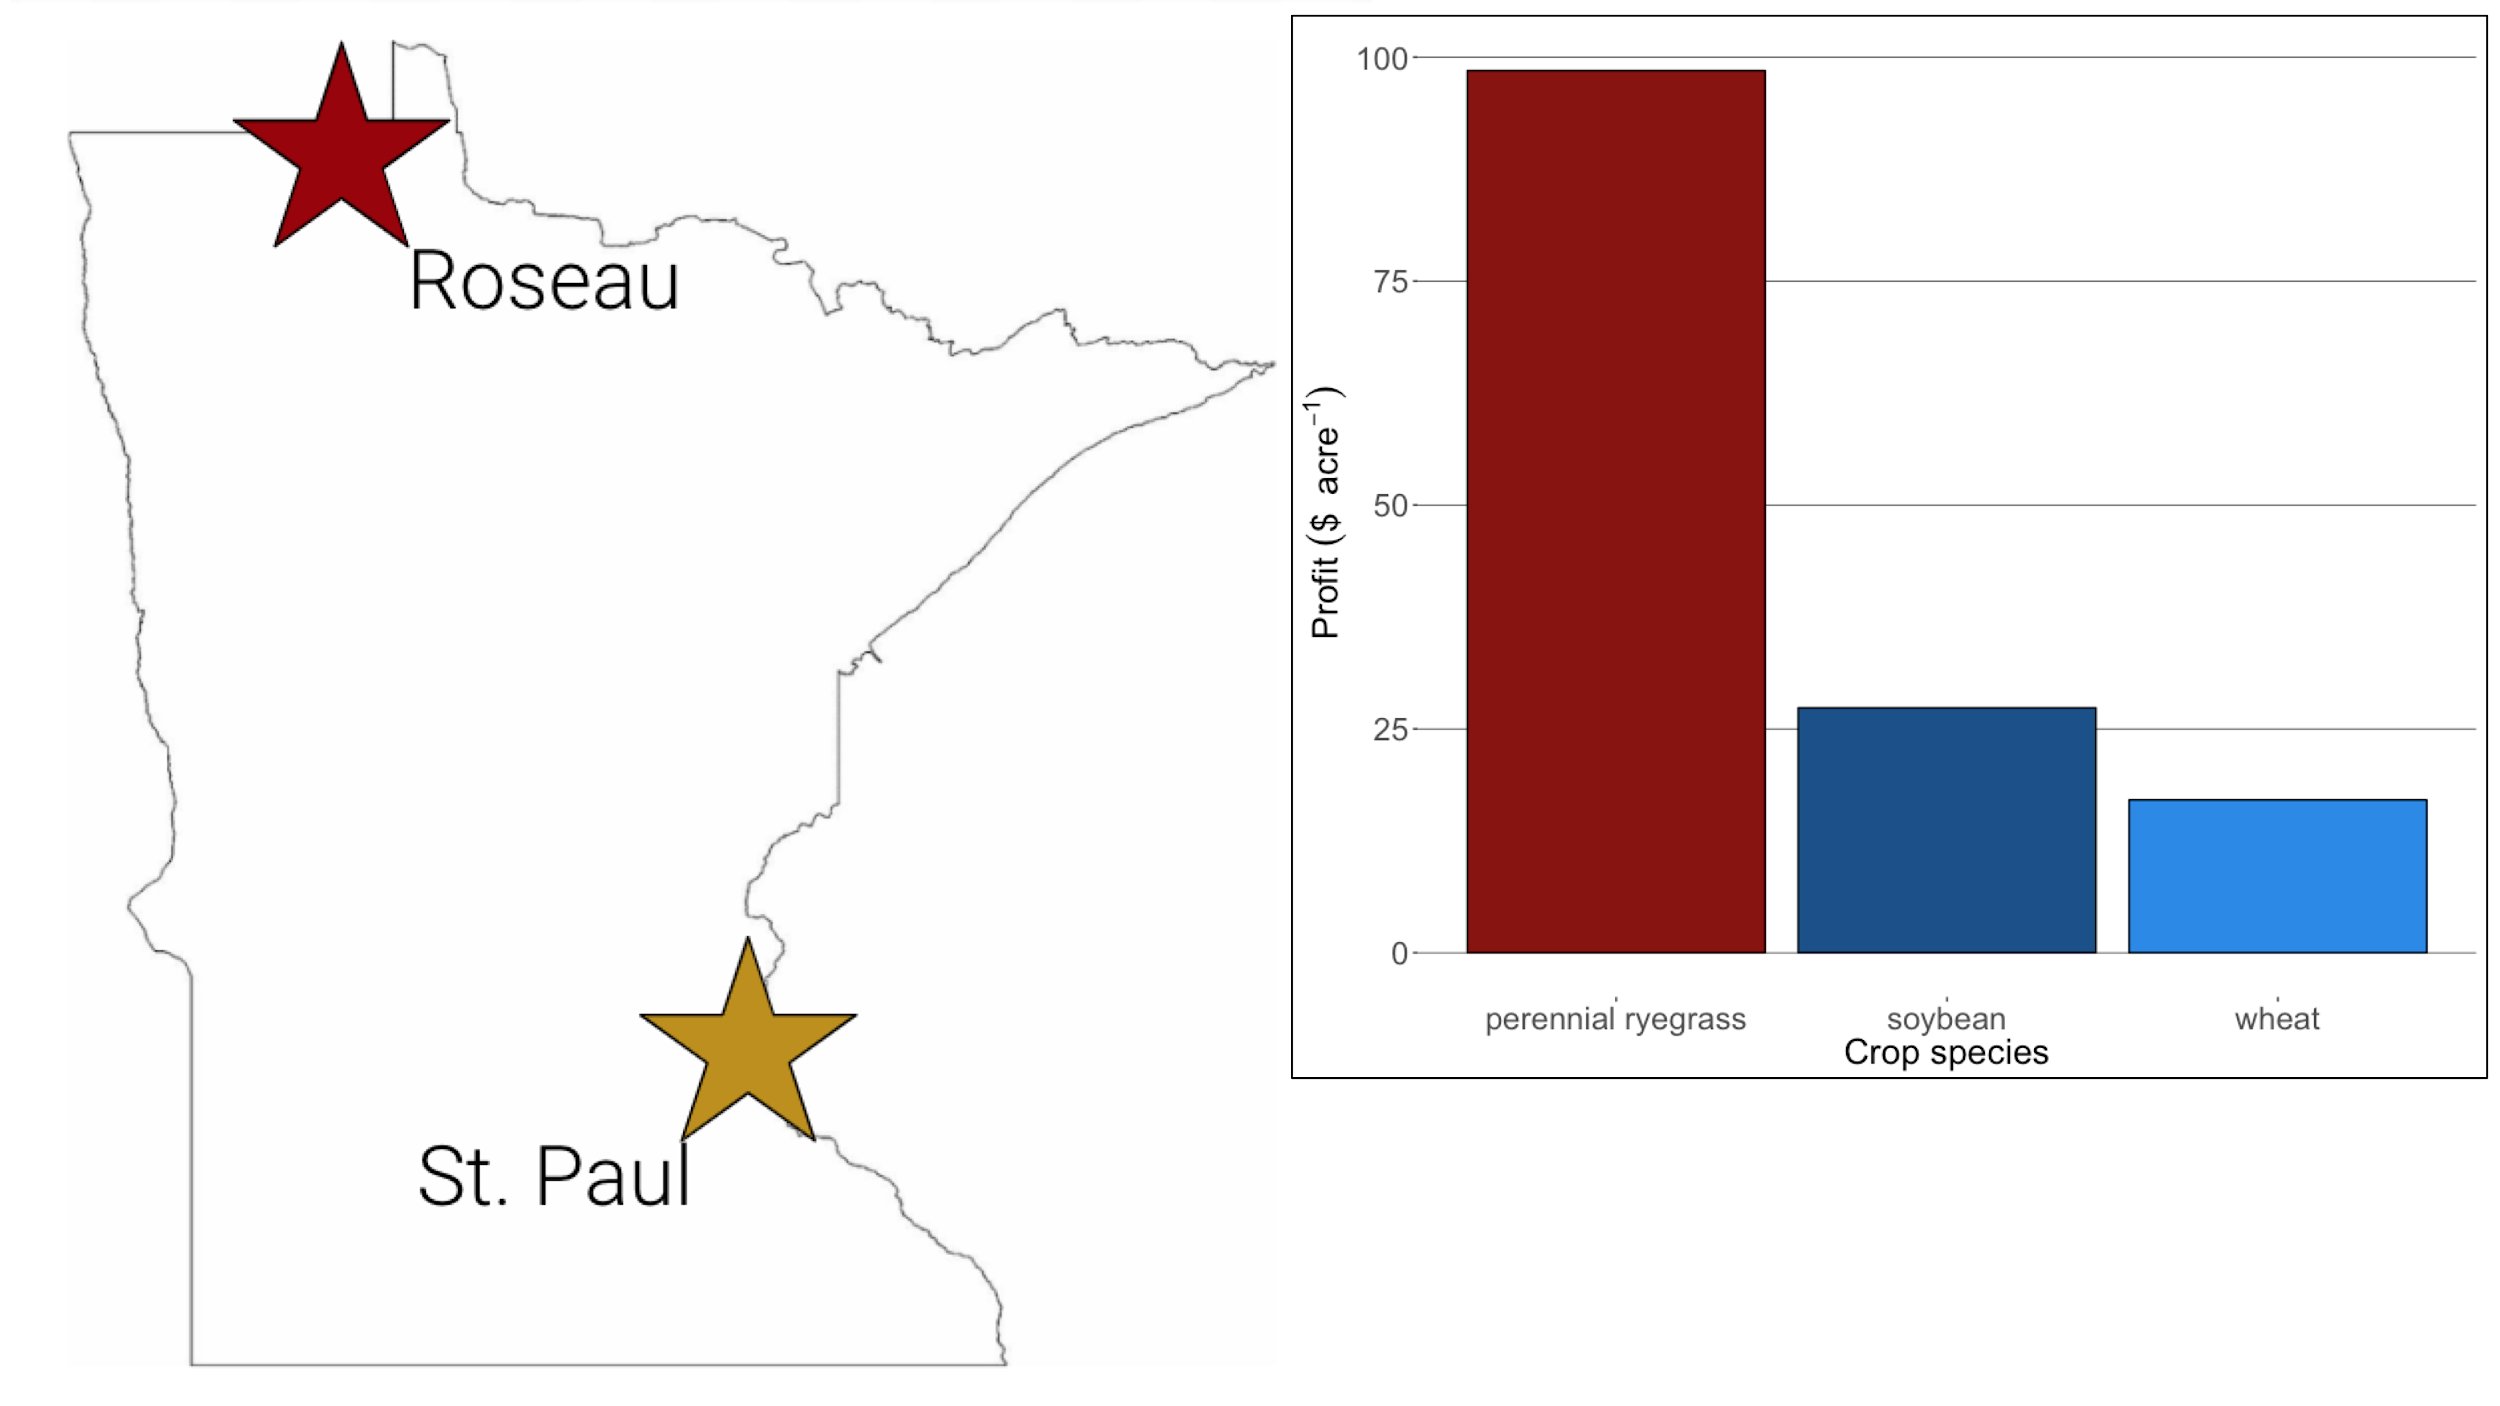 map of Minnesota with Roseau and St. Paul marked with a star; a chart comparing perennial ryegrass, soybean and wheat profits